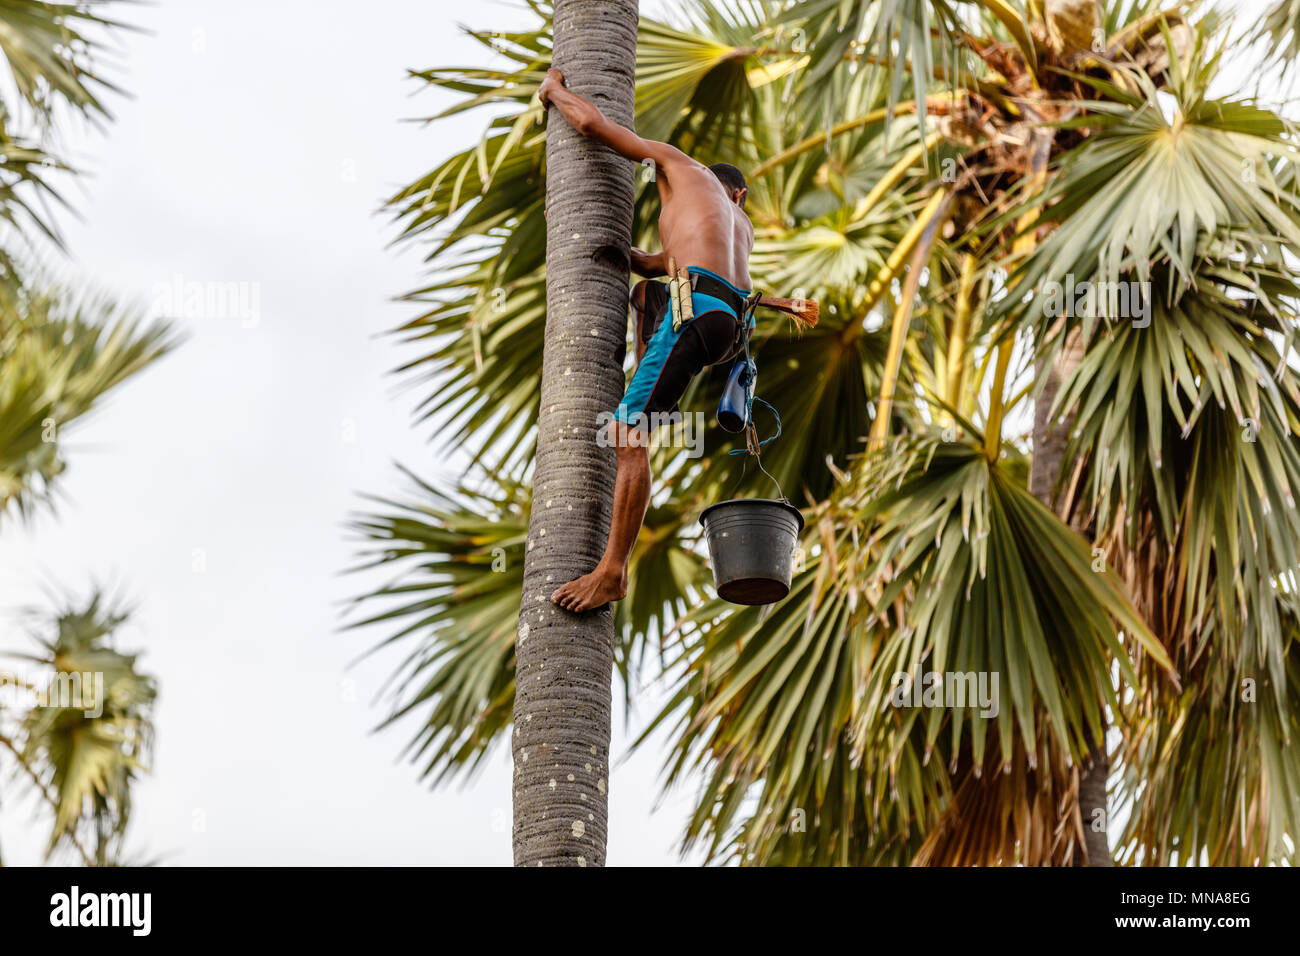 Rotenese man climbing palm tree to collect sap a coconut tree for palm sugar production. Rote Island, Indonesia Stock Photo